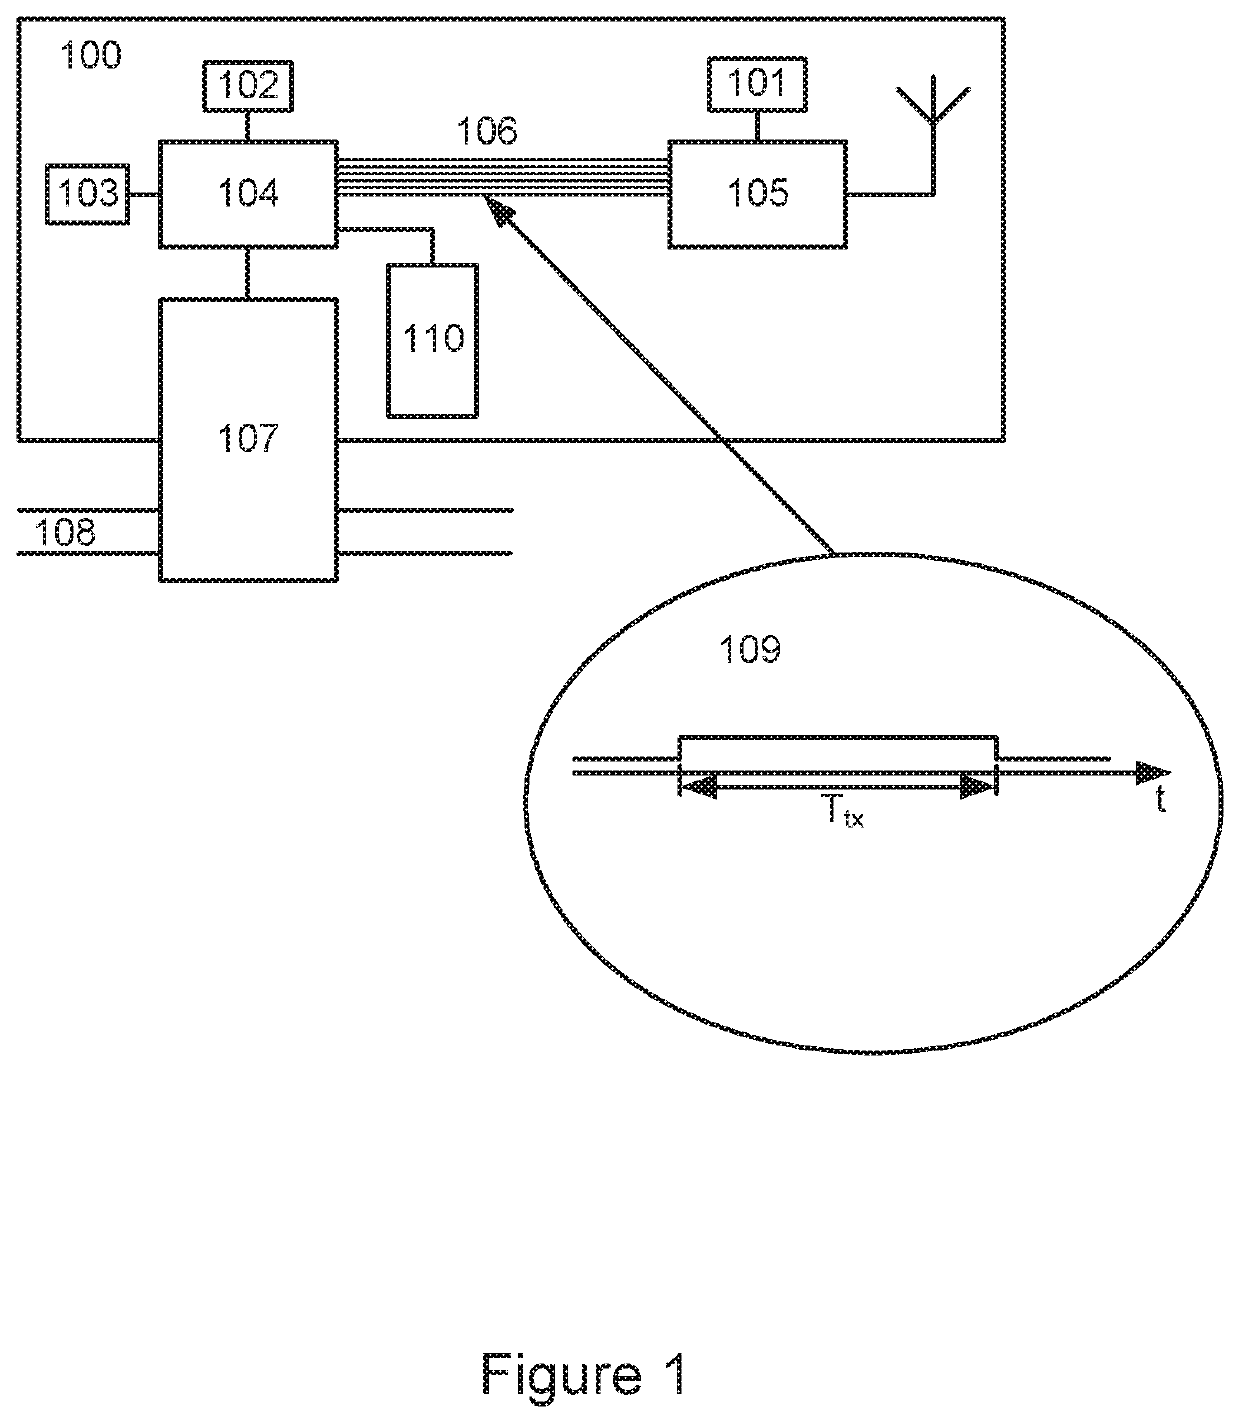 Radio communication device with high precision real time clock